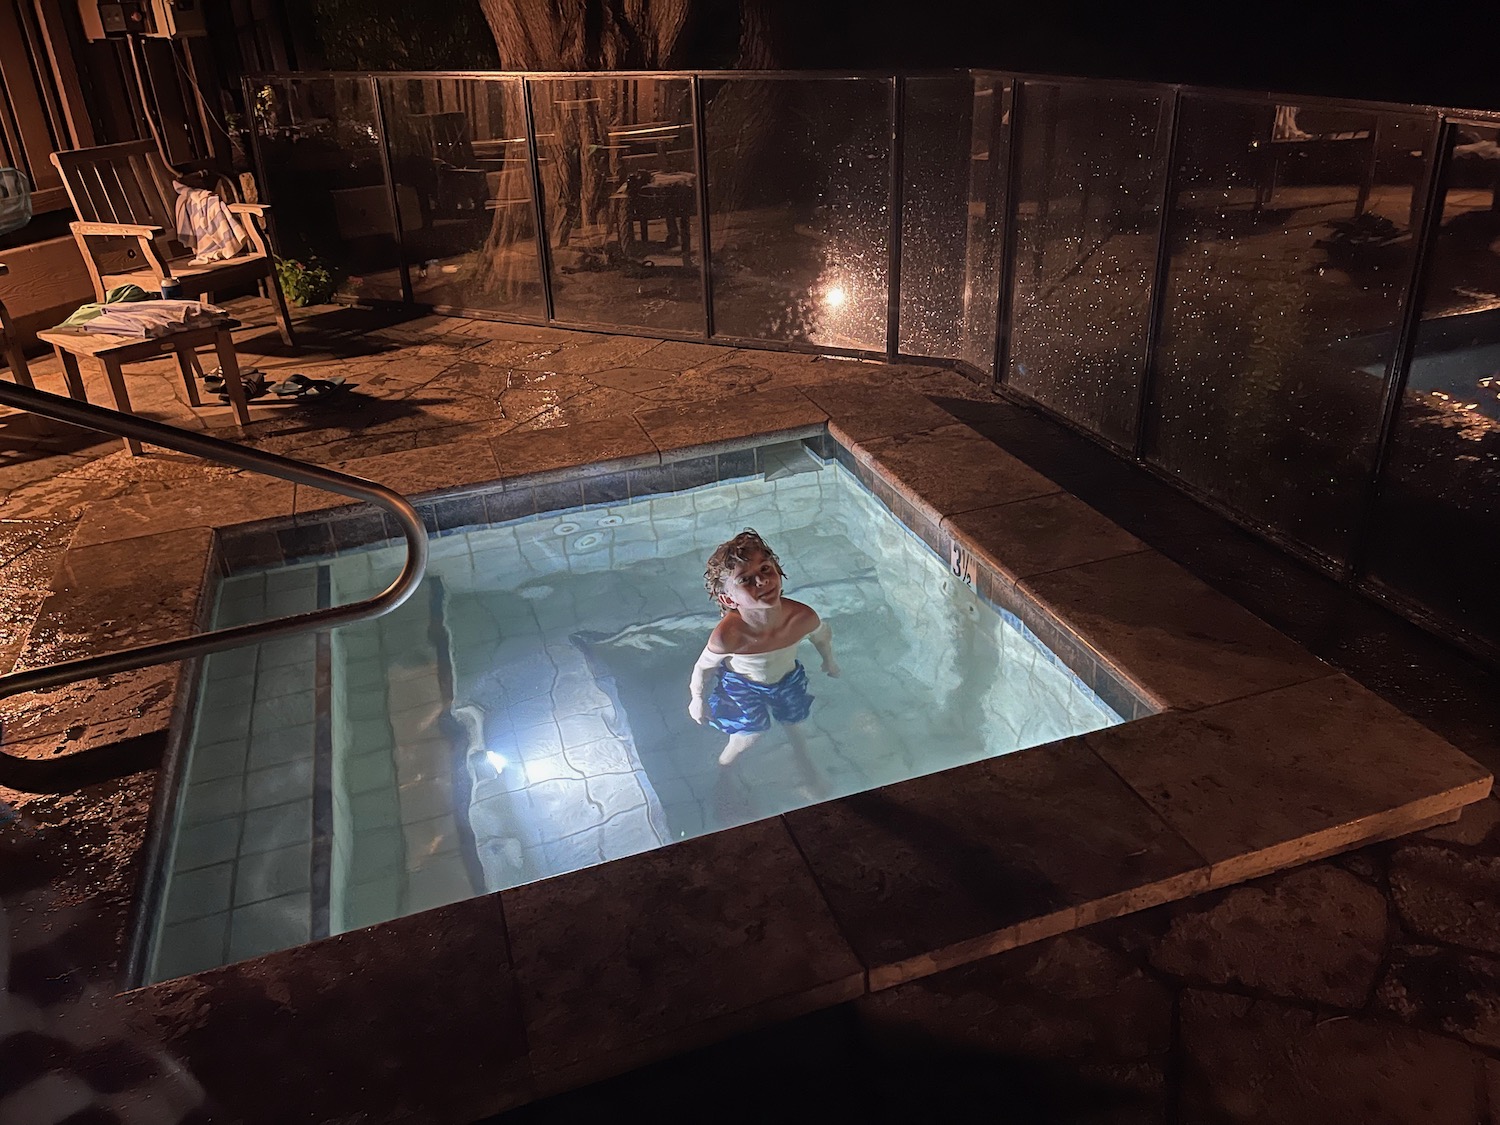 a boy in a pool at night